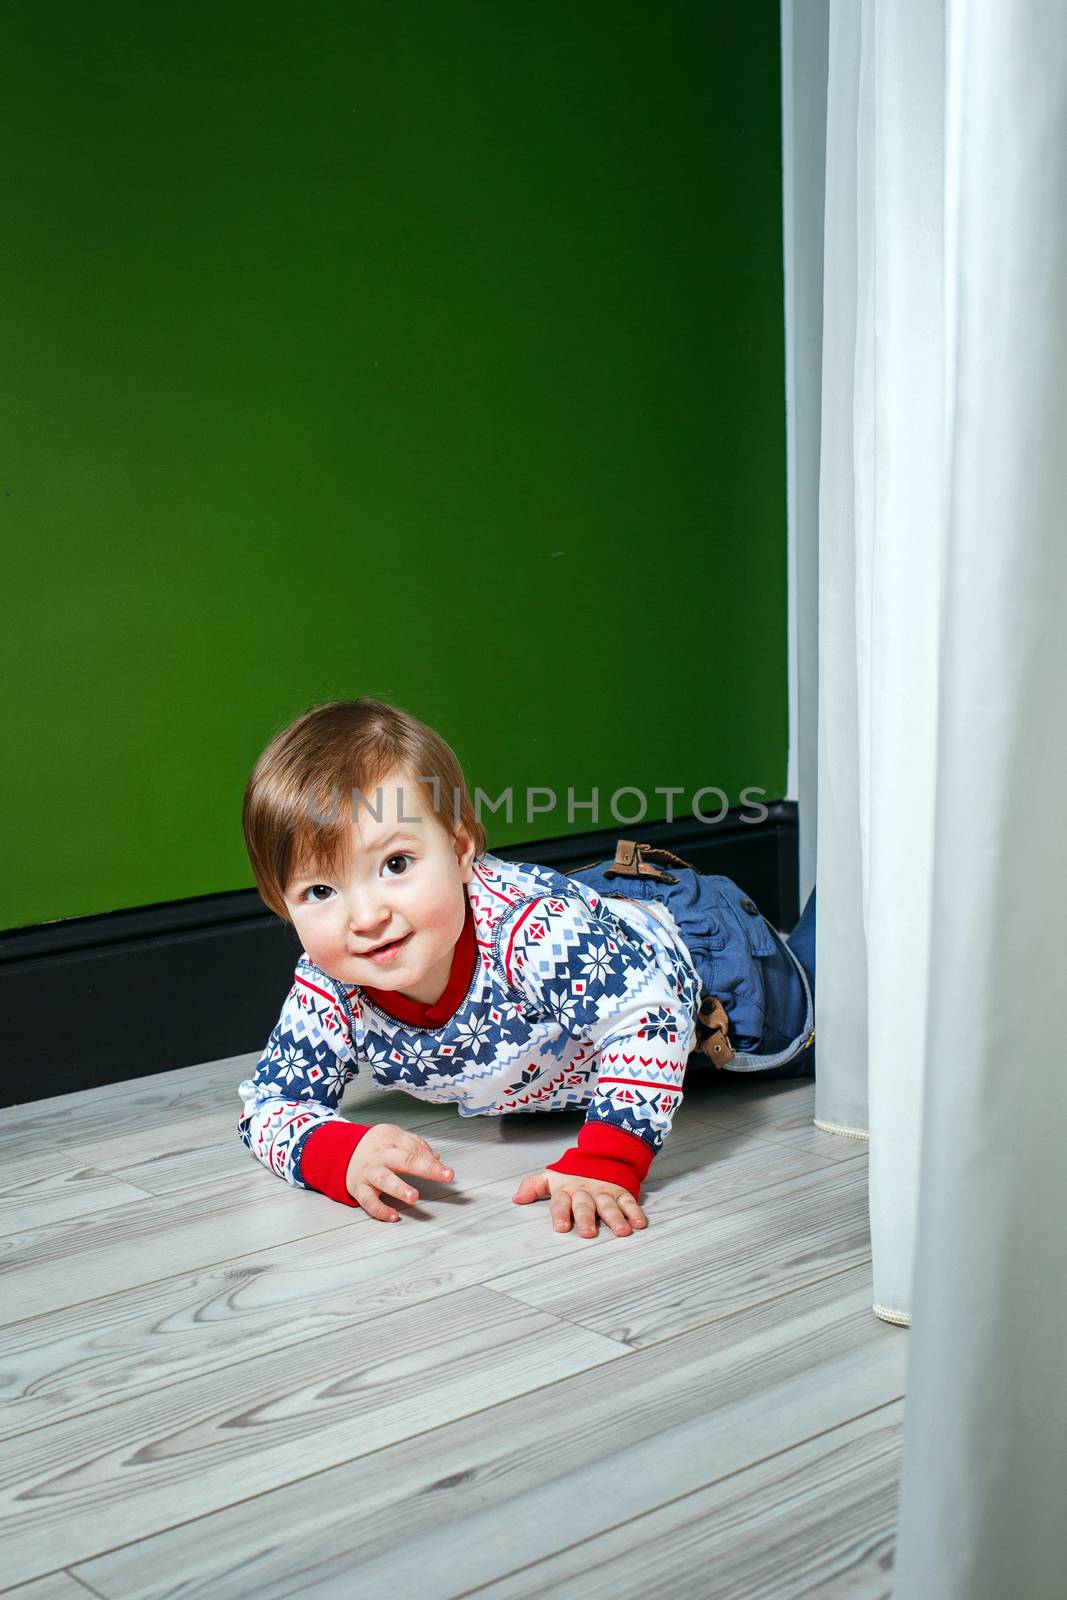 Little boy in a sweater and jeans at home on a wooden floor